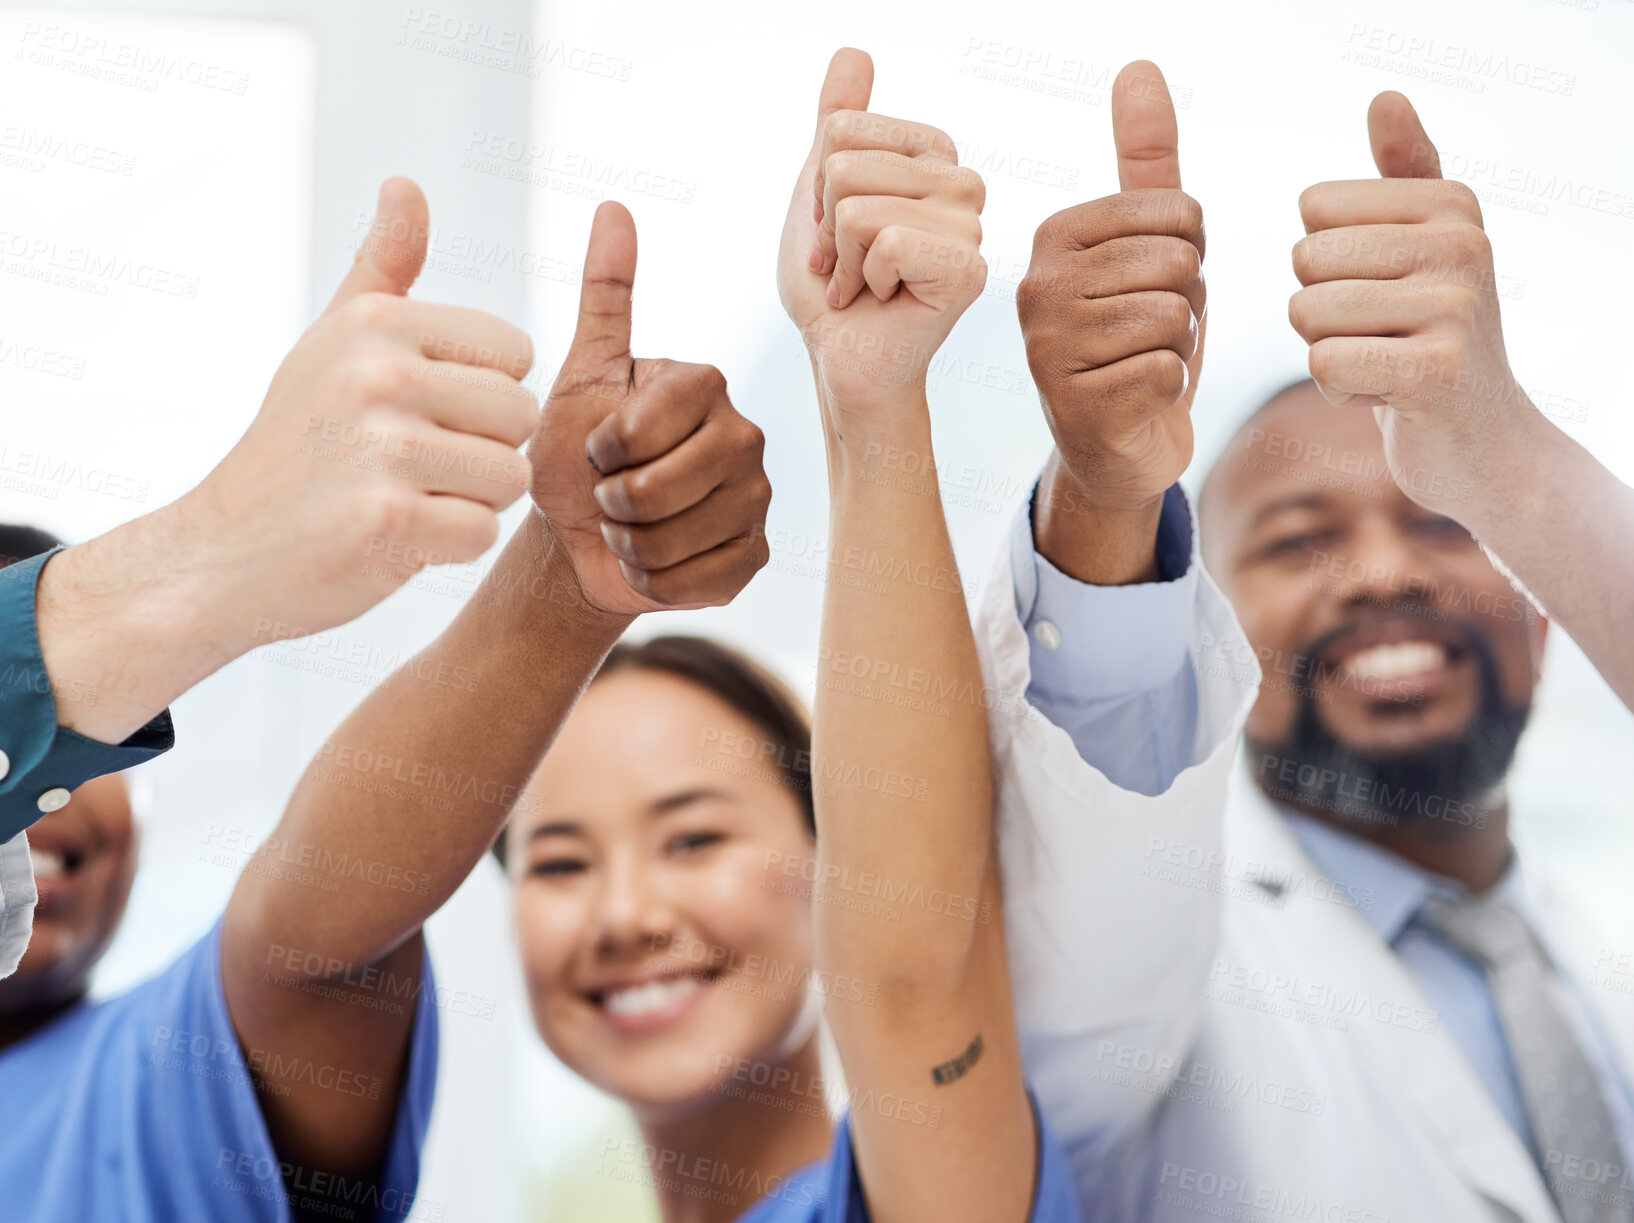 Buy stock photo Shot of a group of doctors showing a thumbs up in a office